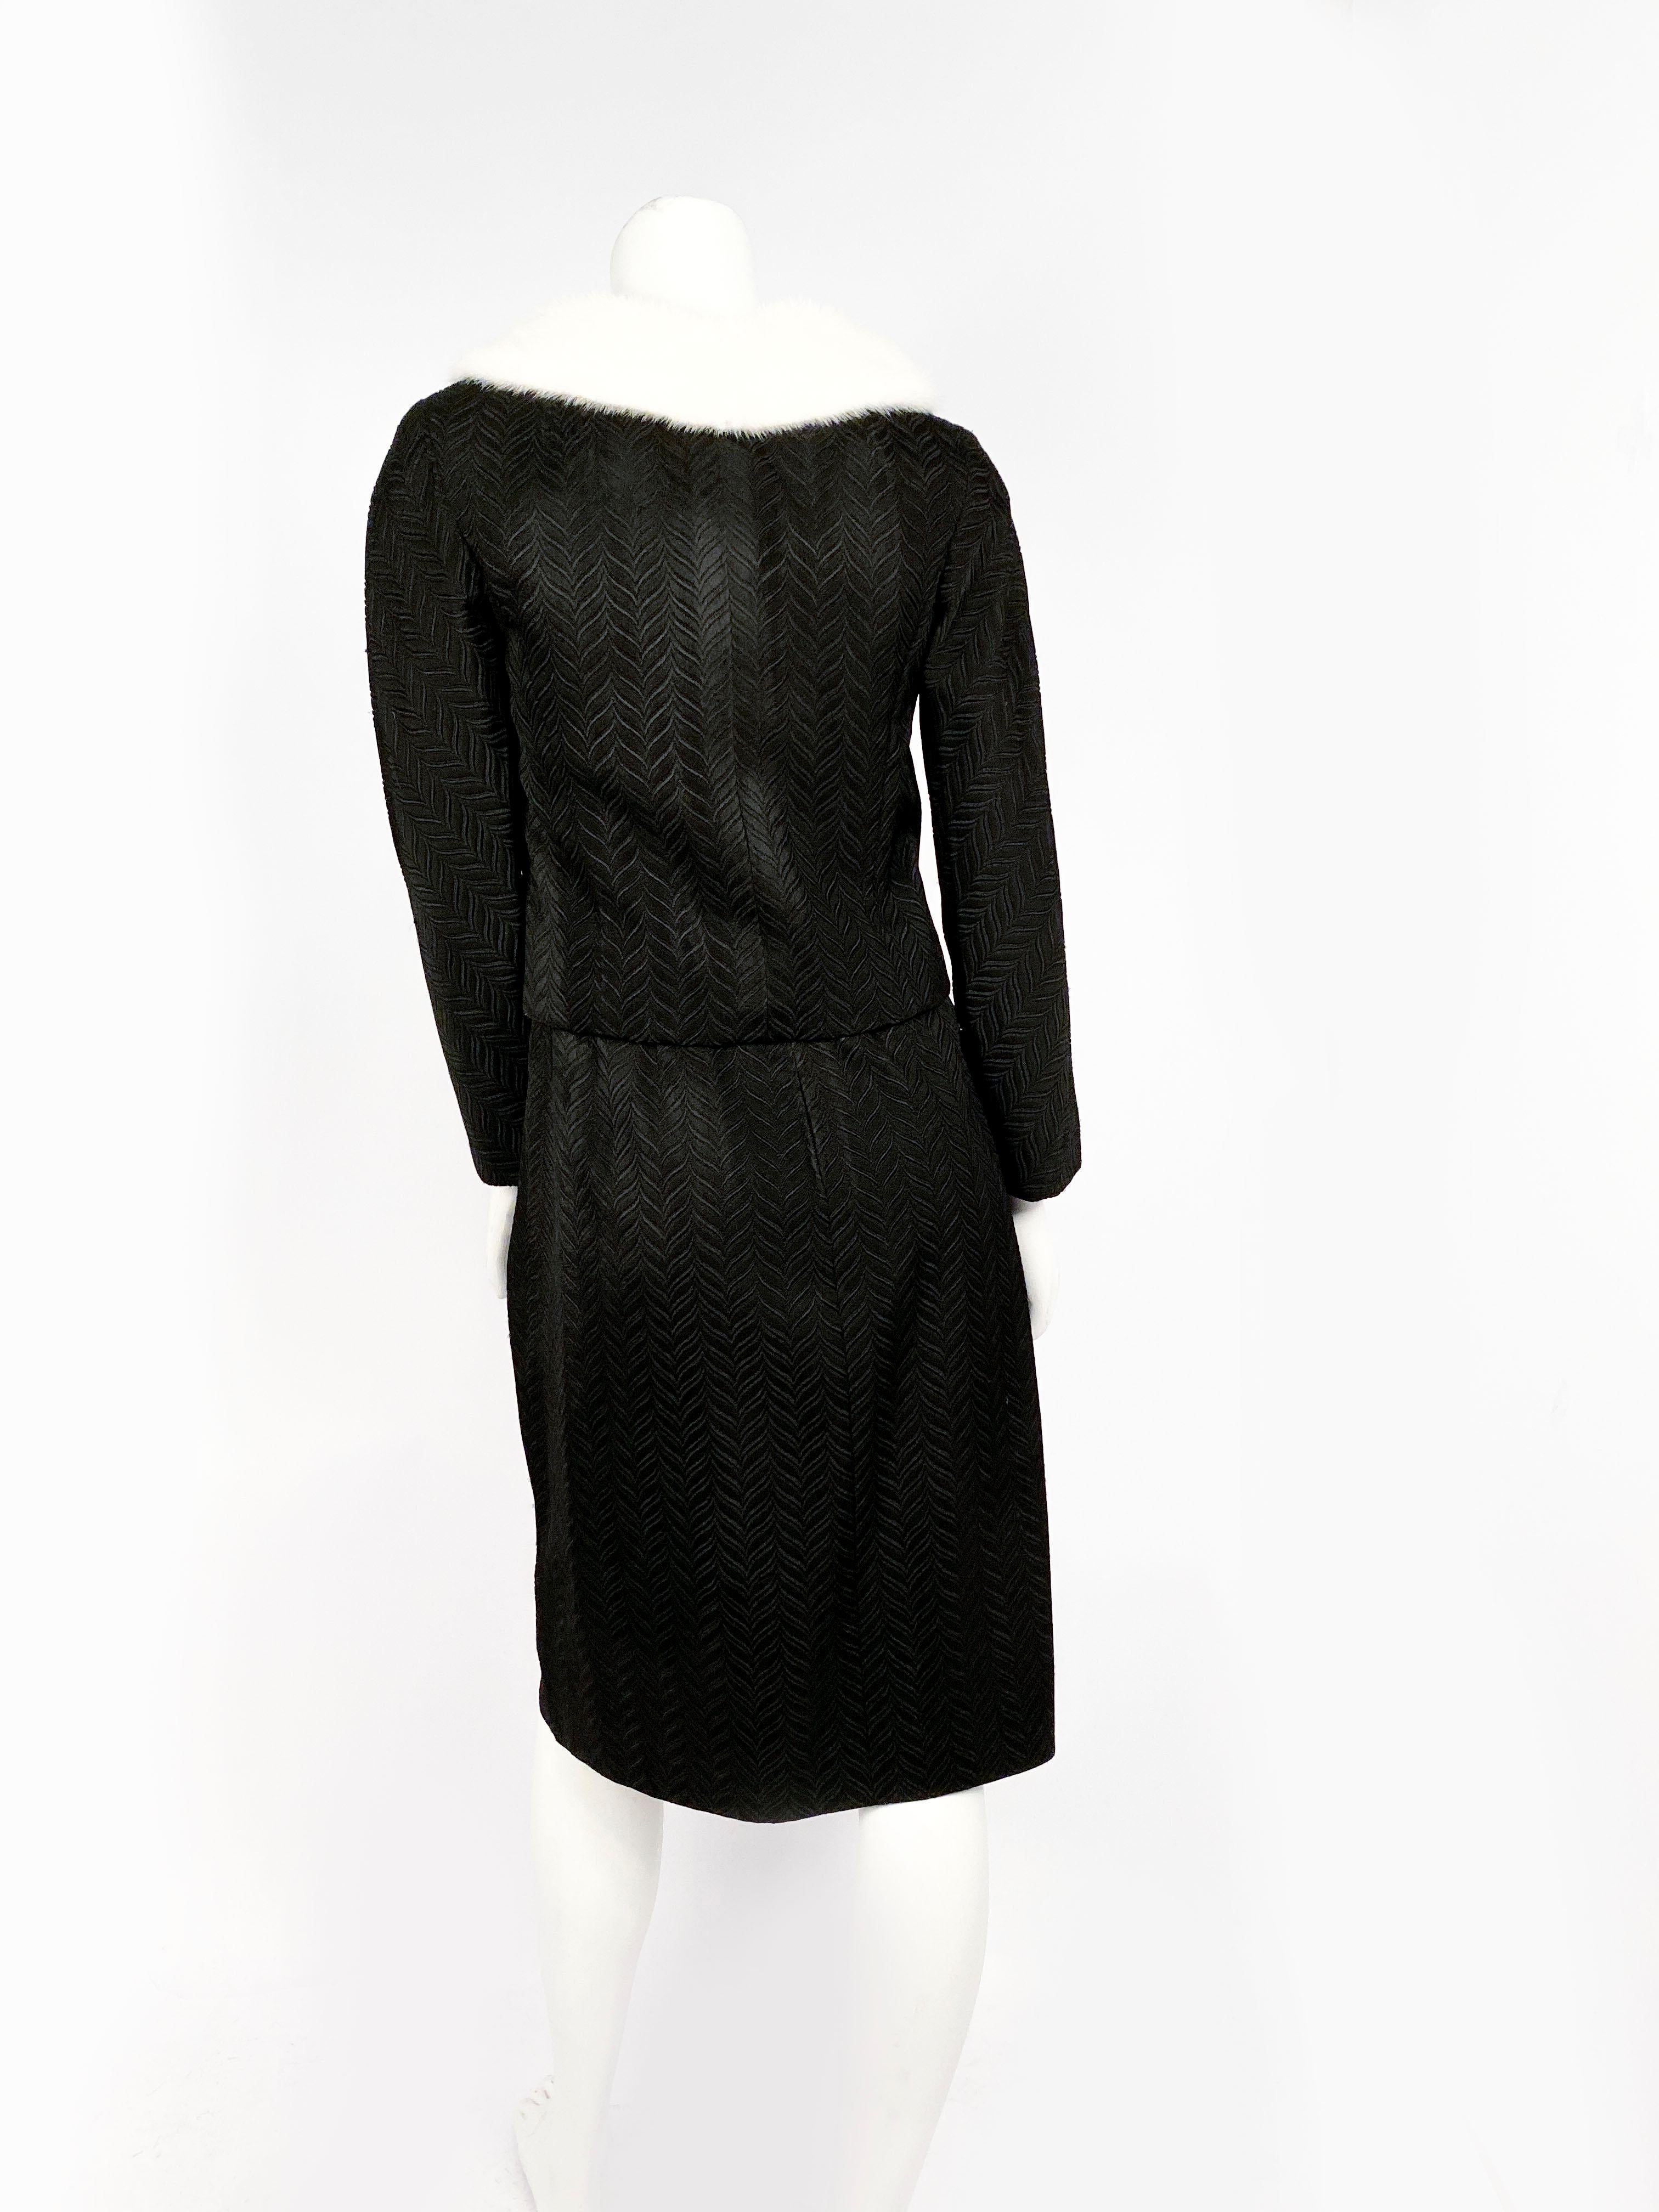 1950s Black Jacquard Dress with Matching Mink-collared Jacket For Sale 2